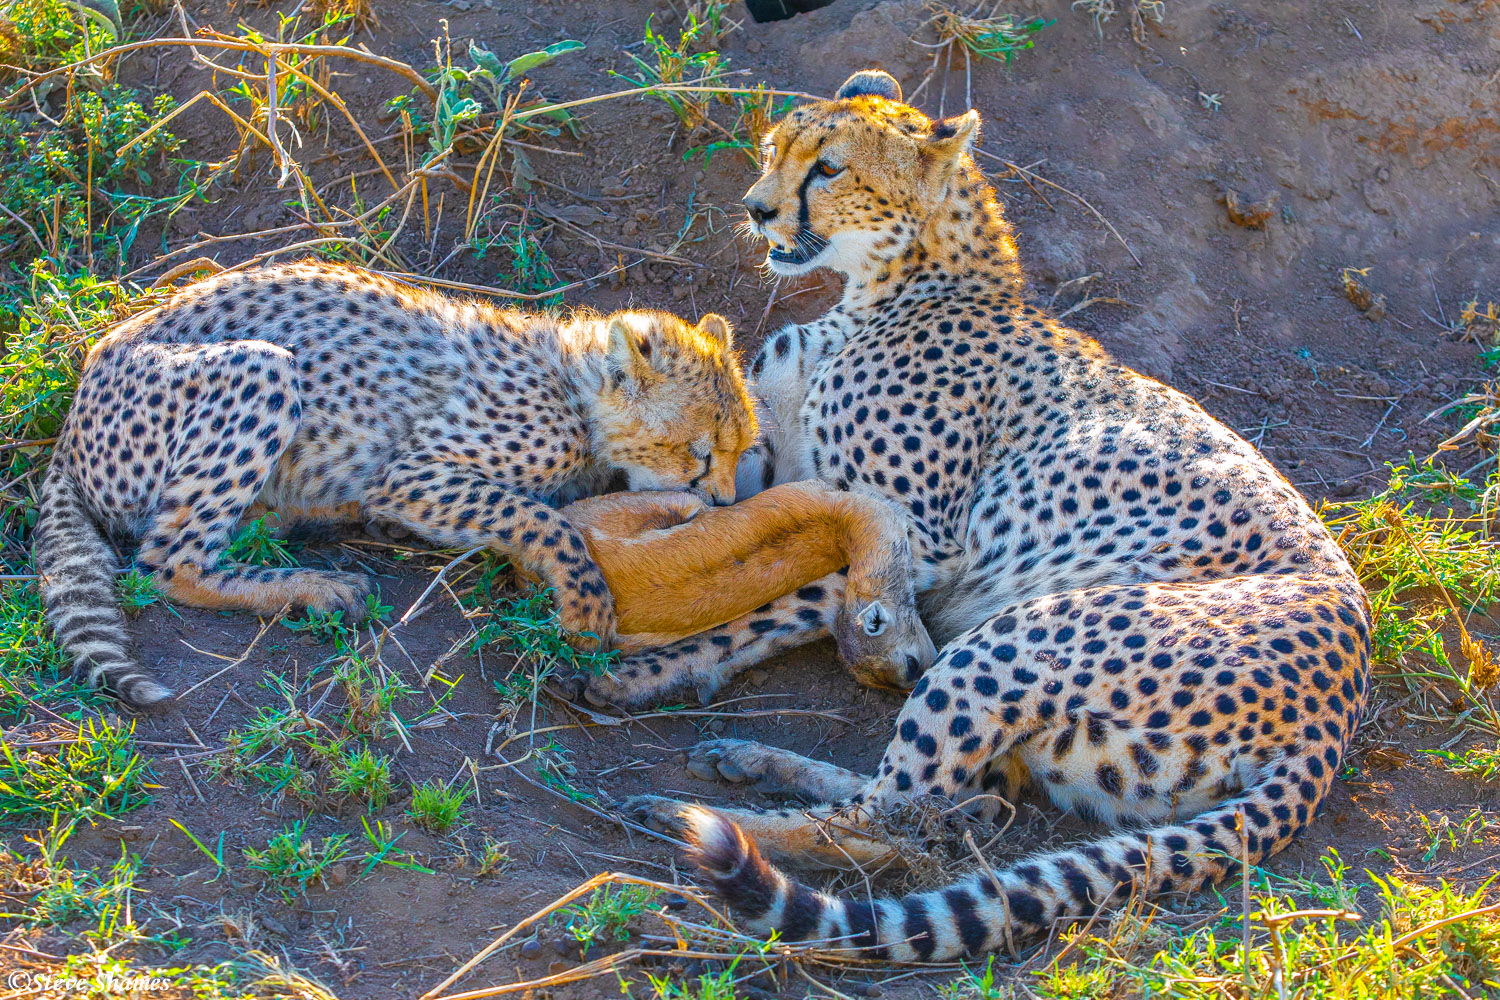 The cheetah cub finally kills the gazelle and settles in for a meal.